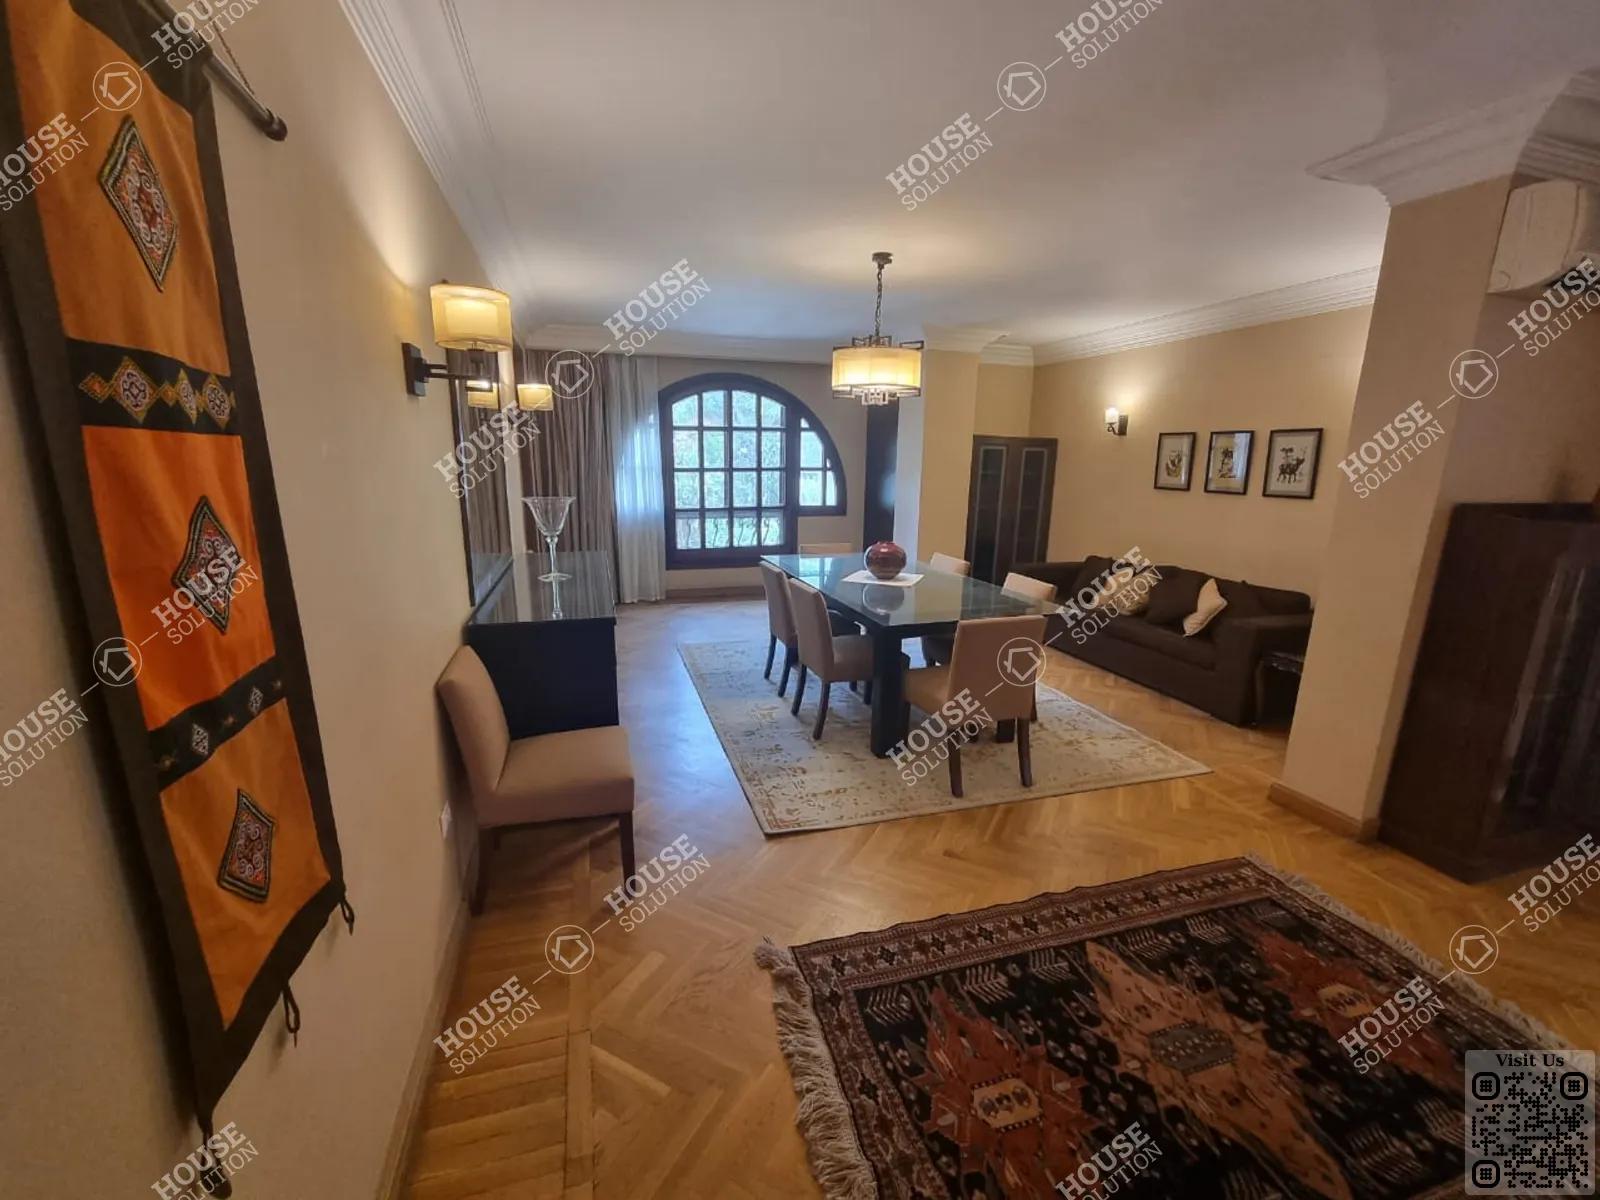 DINING AREA @ Apartments For Rent In Maadi Maadi Sarayat Area: 300 m² consists of 3 Bedrooms 3 Bathrooms Modern furnished 5 stars #5411-2